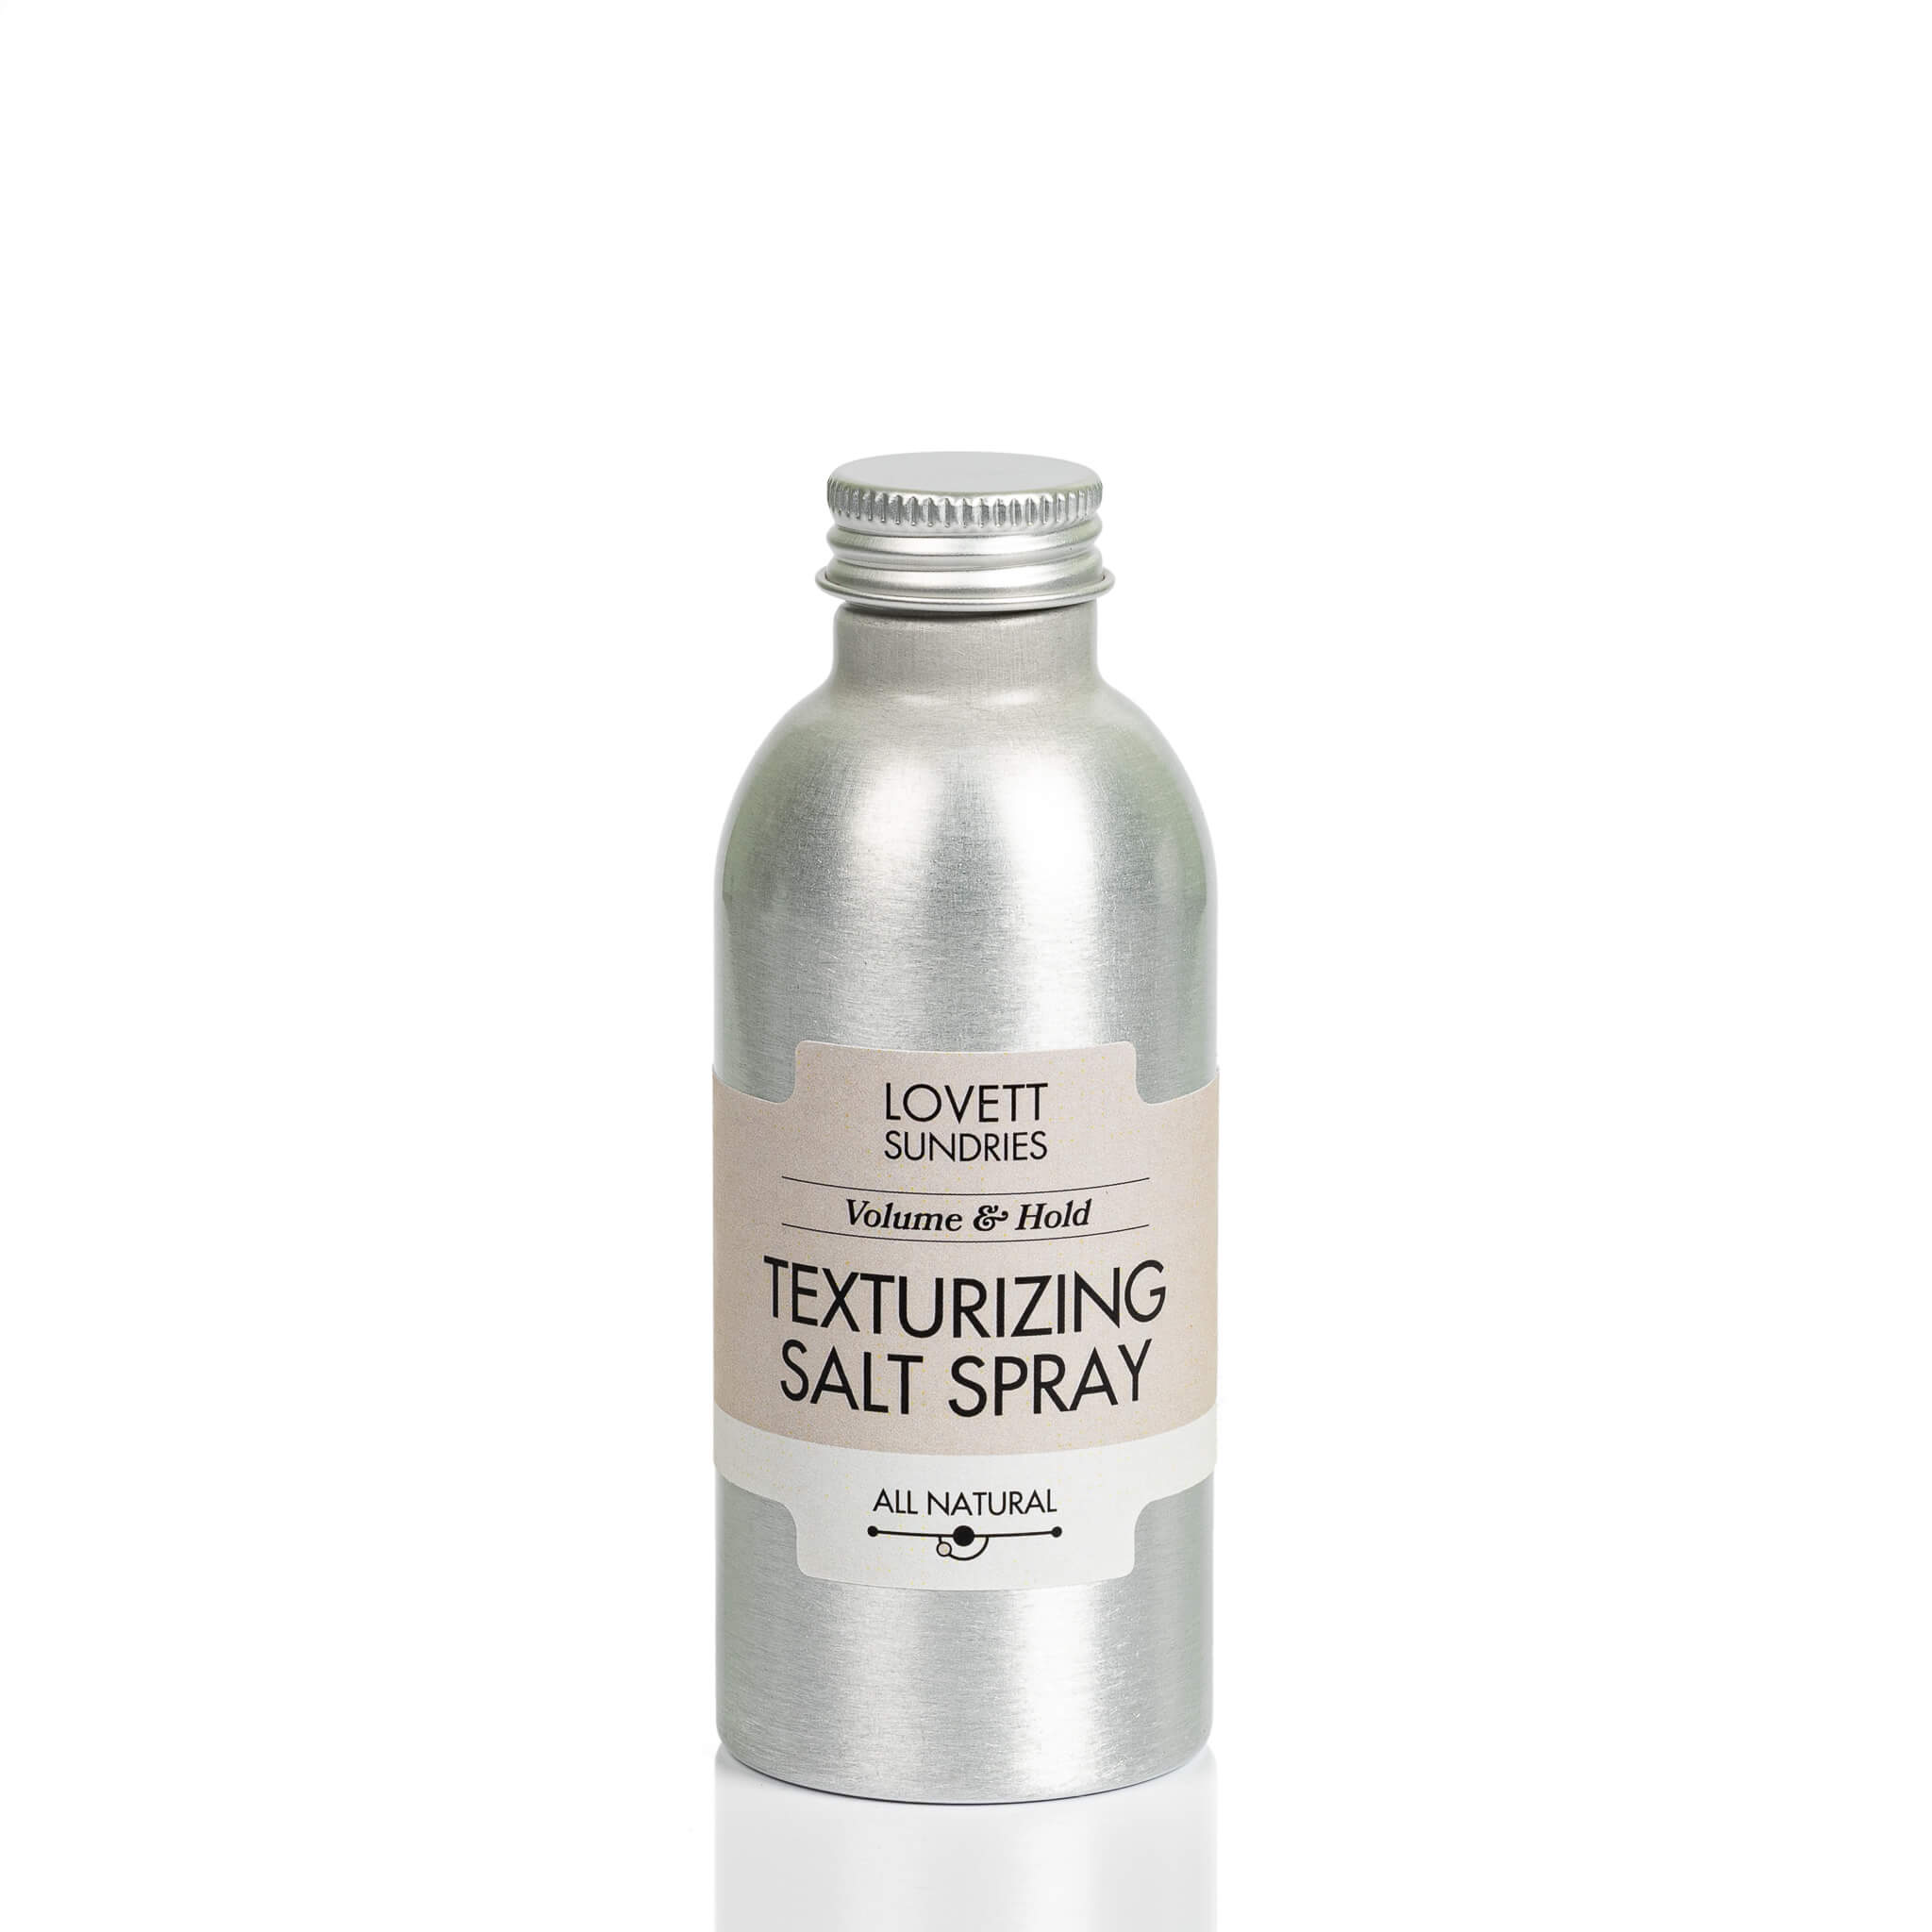 All natural unscented texturizing salt hair spray for voume and hold in a recyclable aluminum bottle with a screw refill top.. 